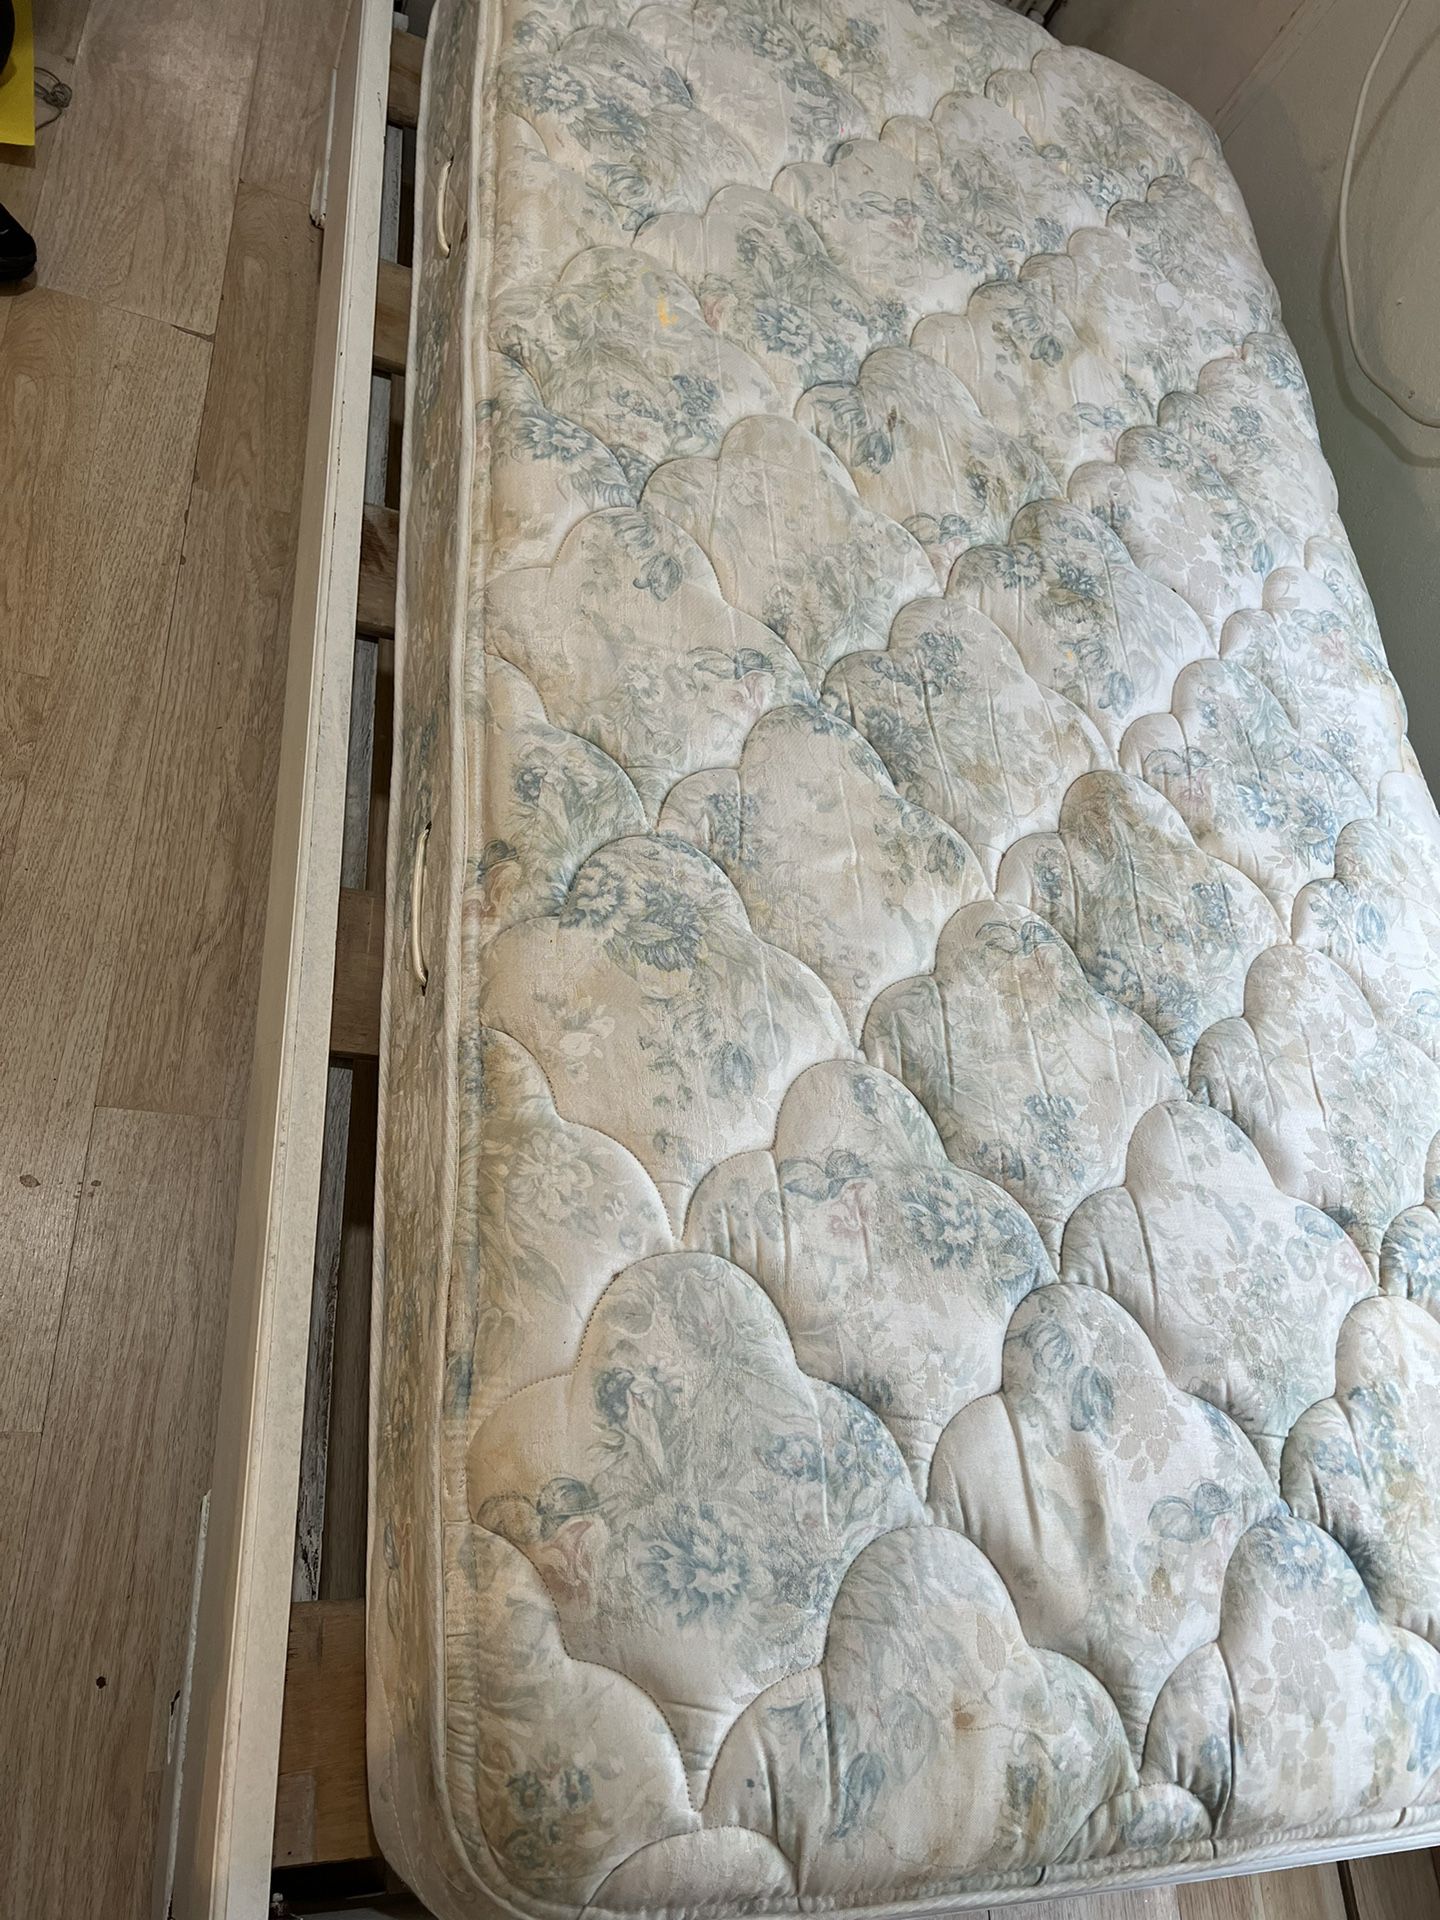 FREE MATTRESS AND BED FRAME 